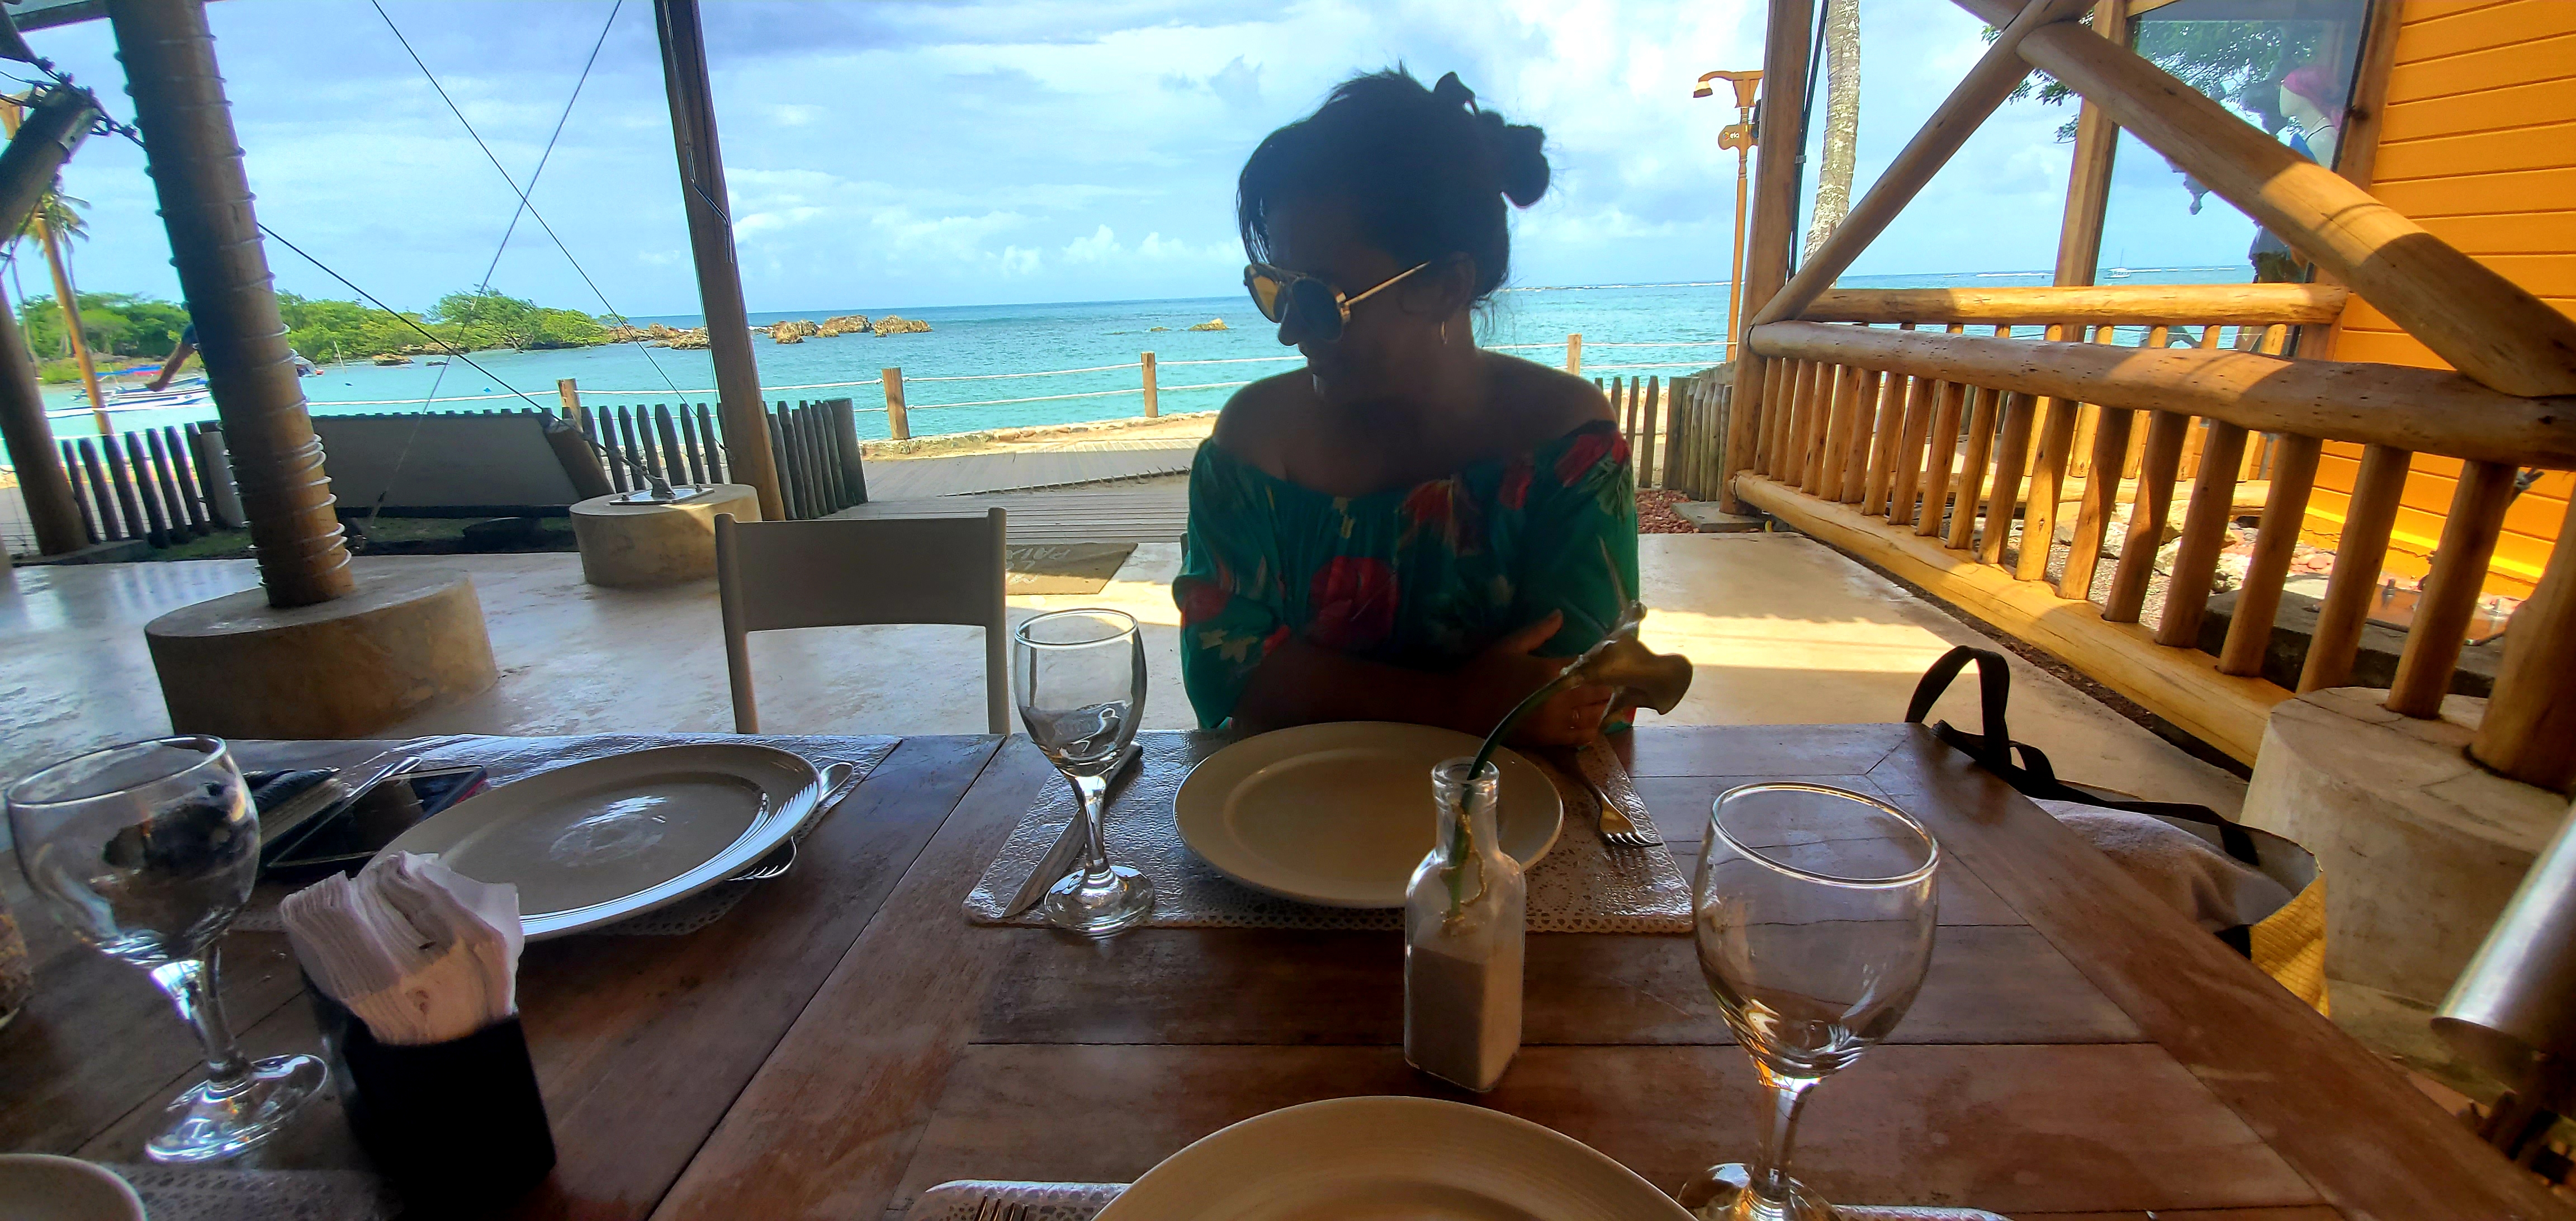 Solange Isaacs on a beach restaurant, gazing at a vast landscape, symbolizing the uncharted horizons and boundless adventure of embracing destiny's unfamiliar paths.